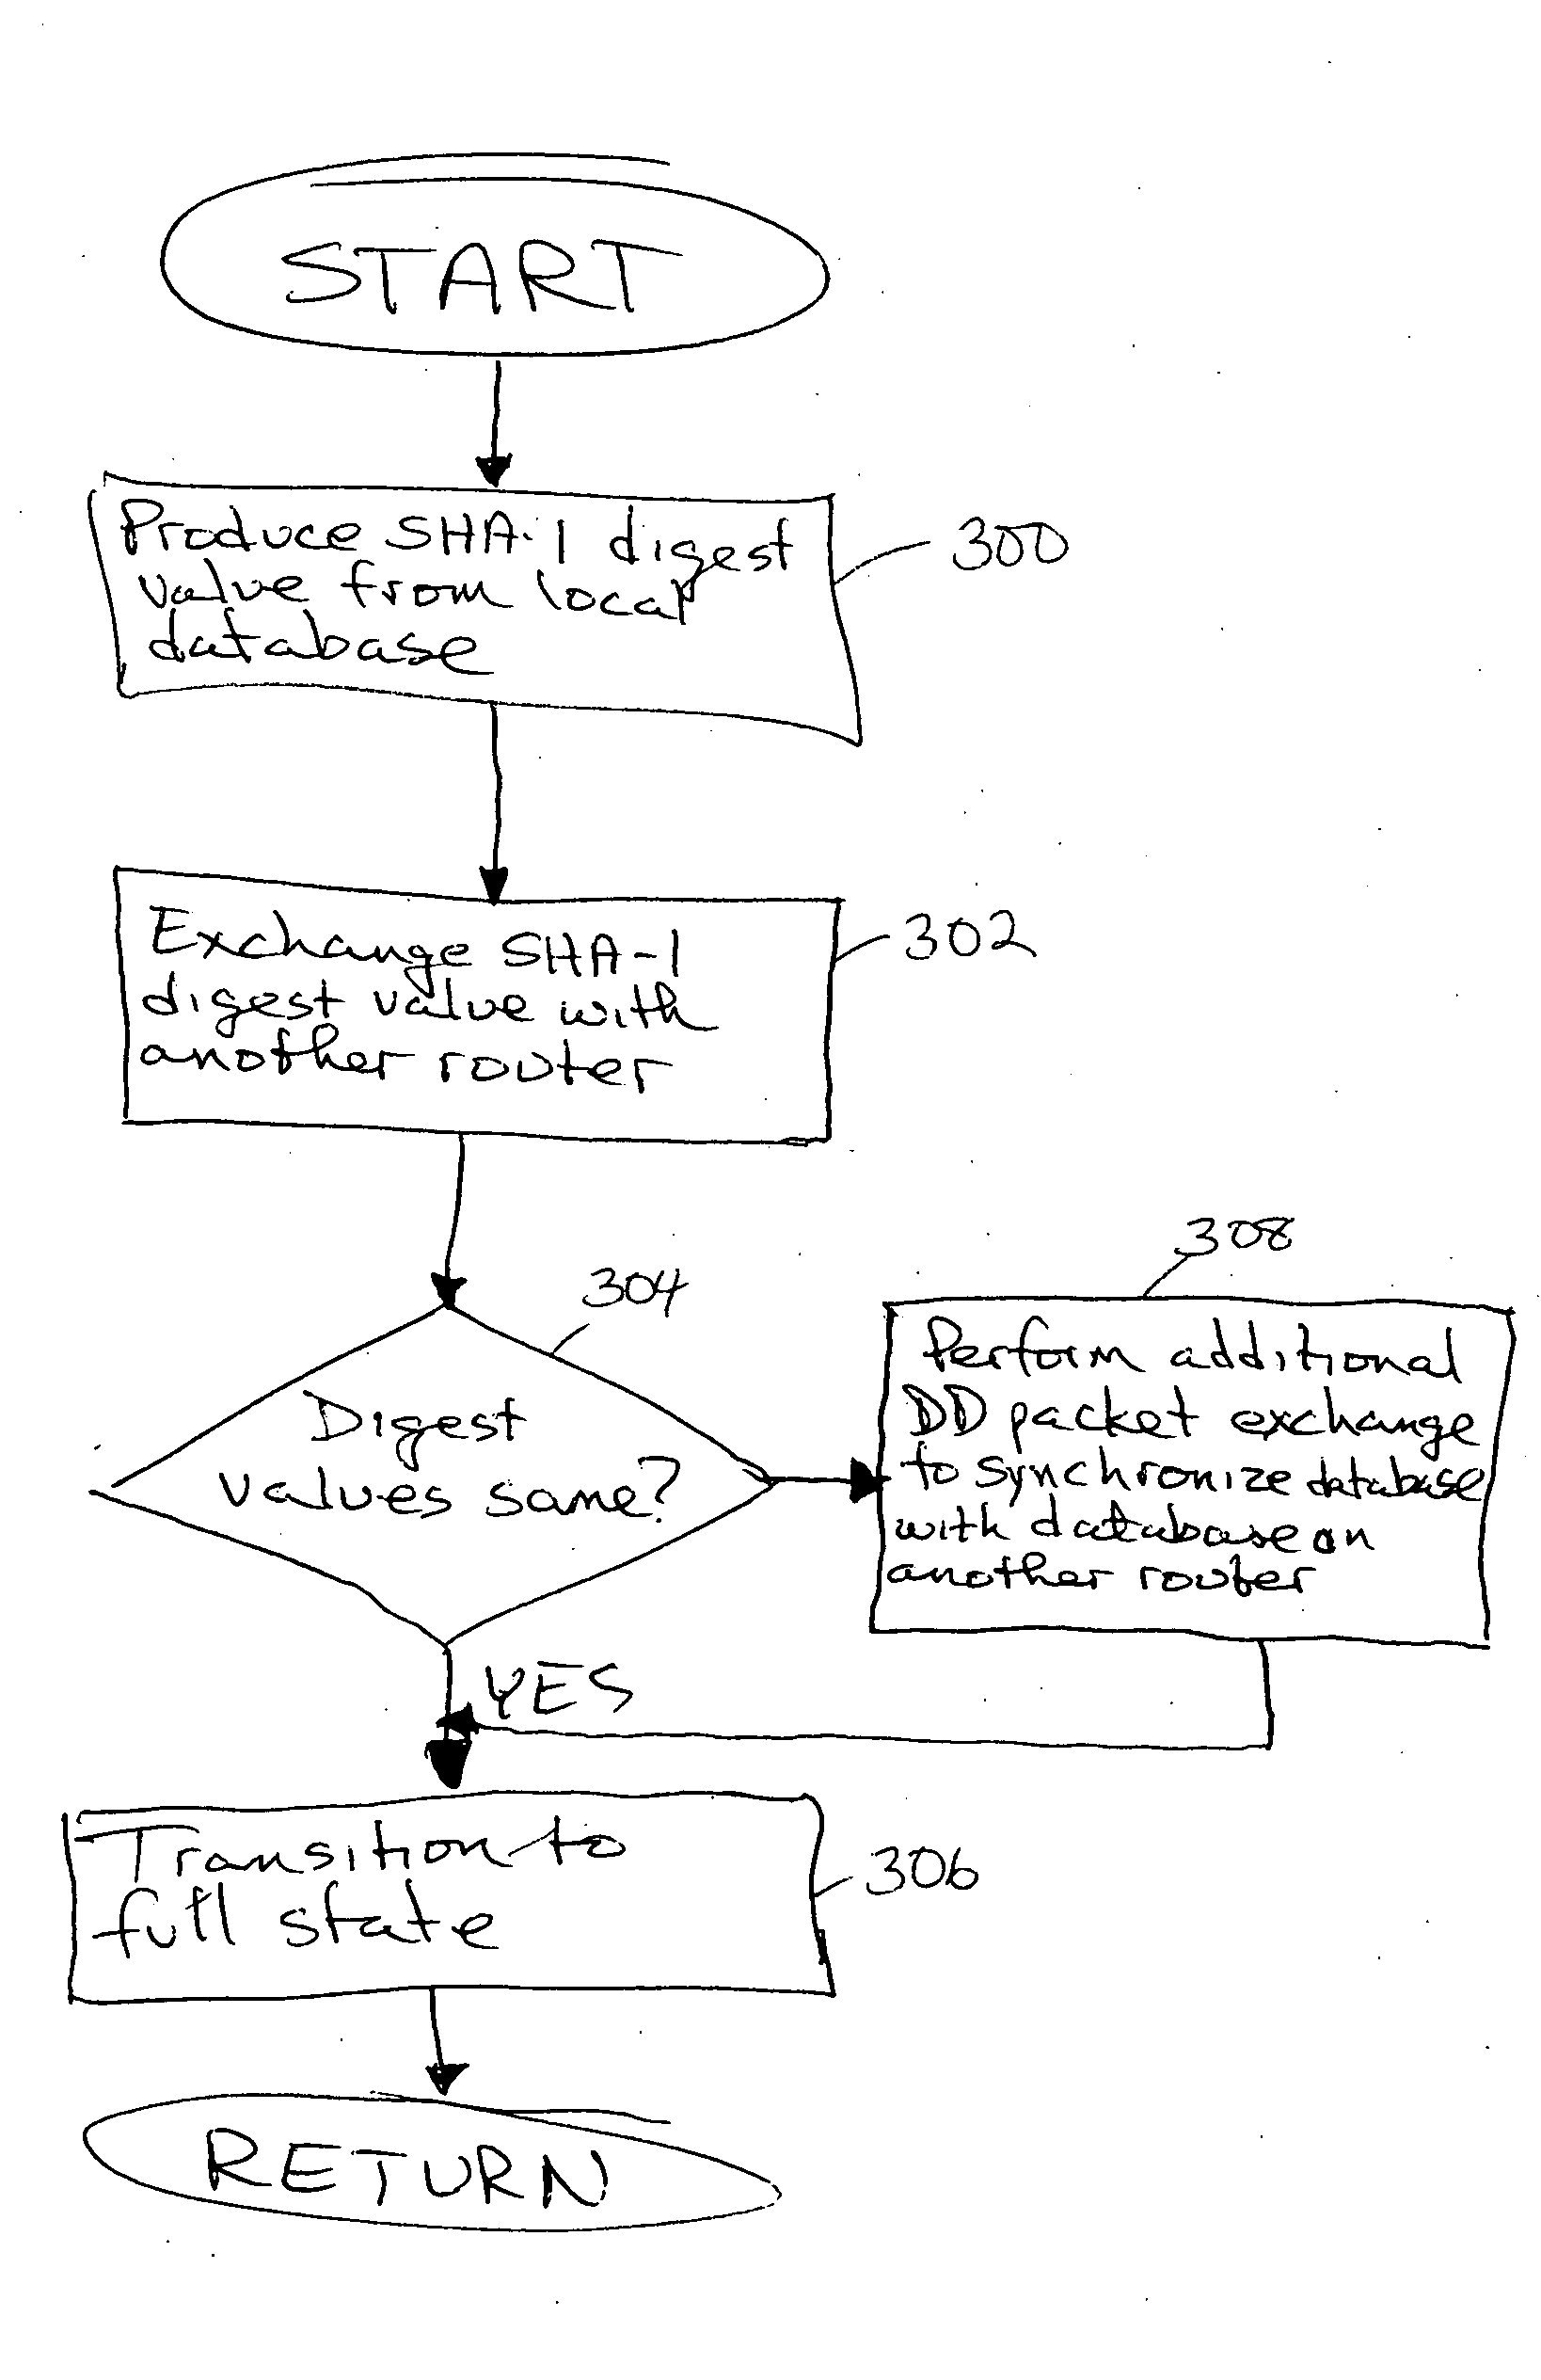 Method and apparatus to minimize database exchange in OSPF by using a SHA-1 digest value